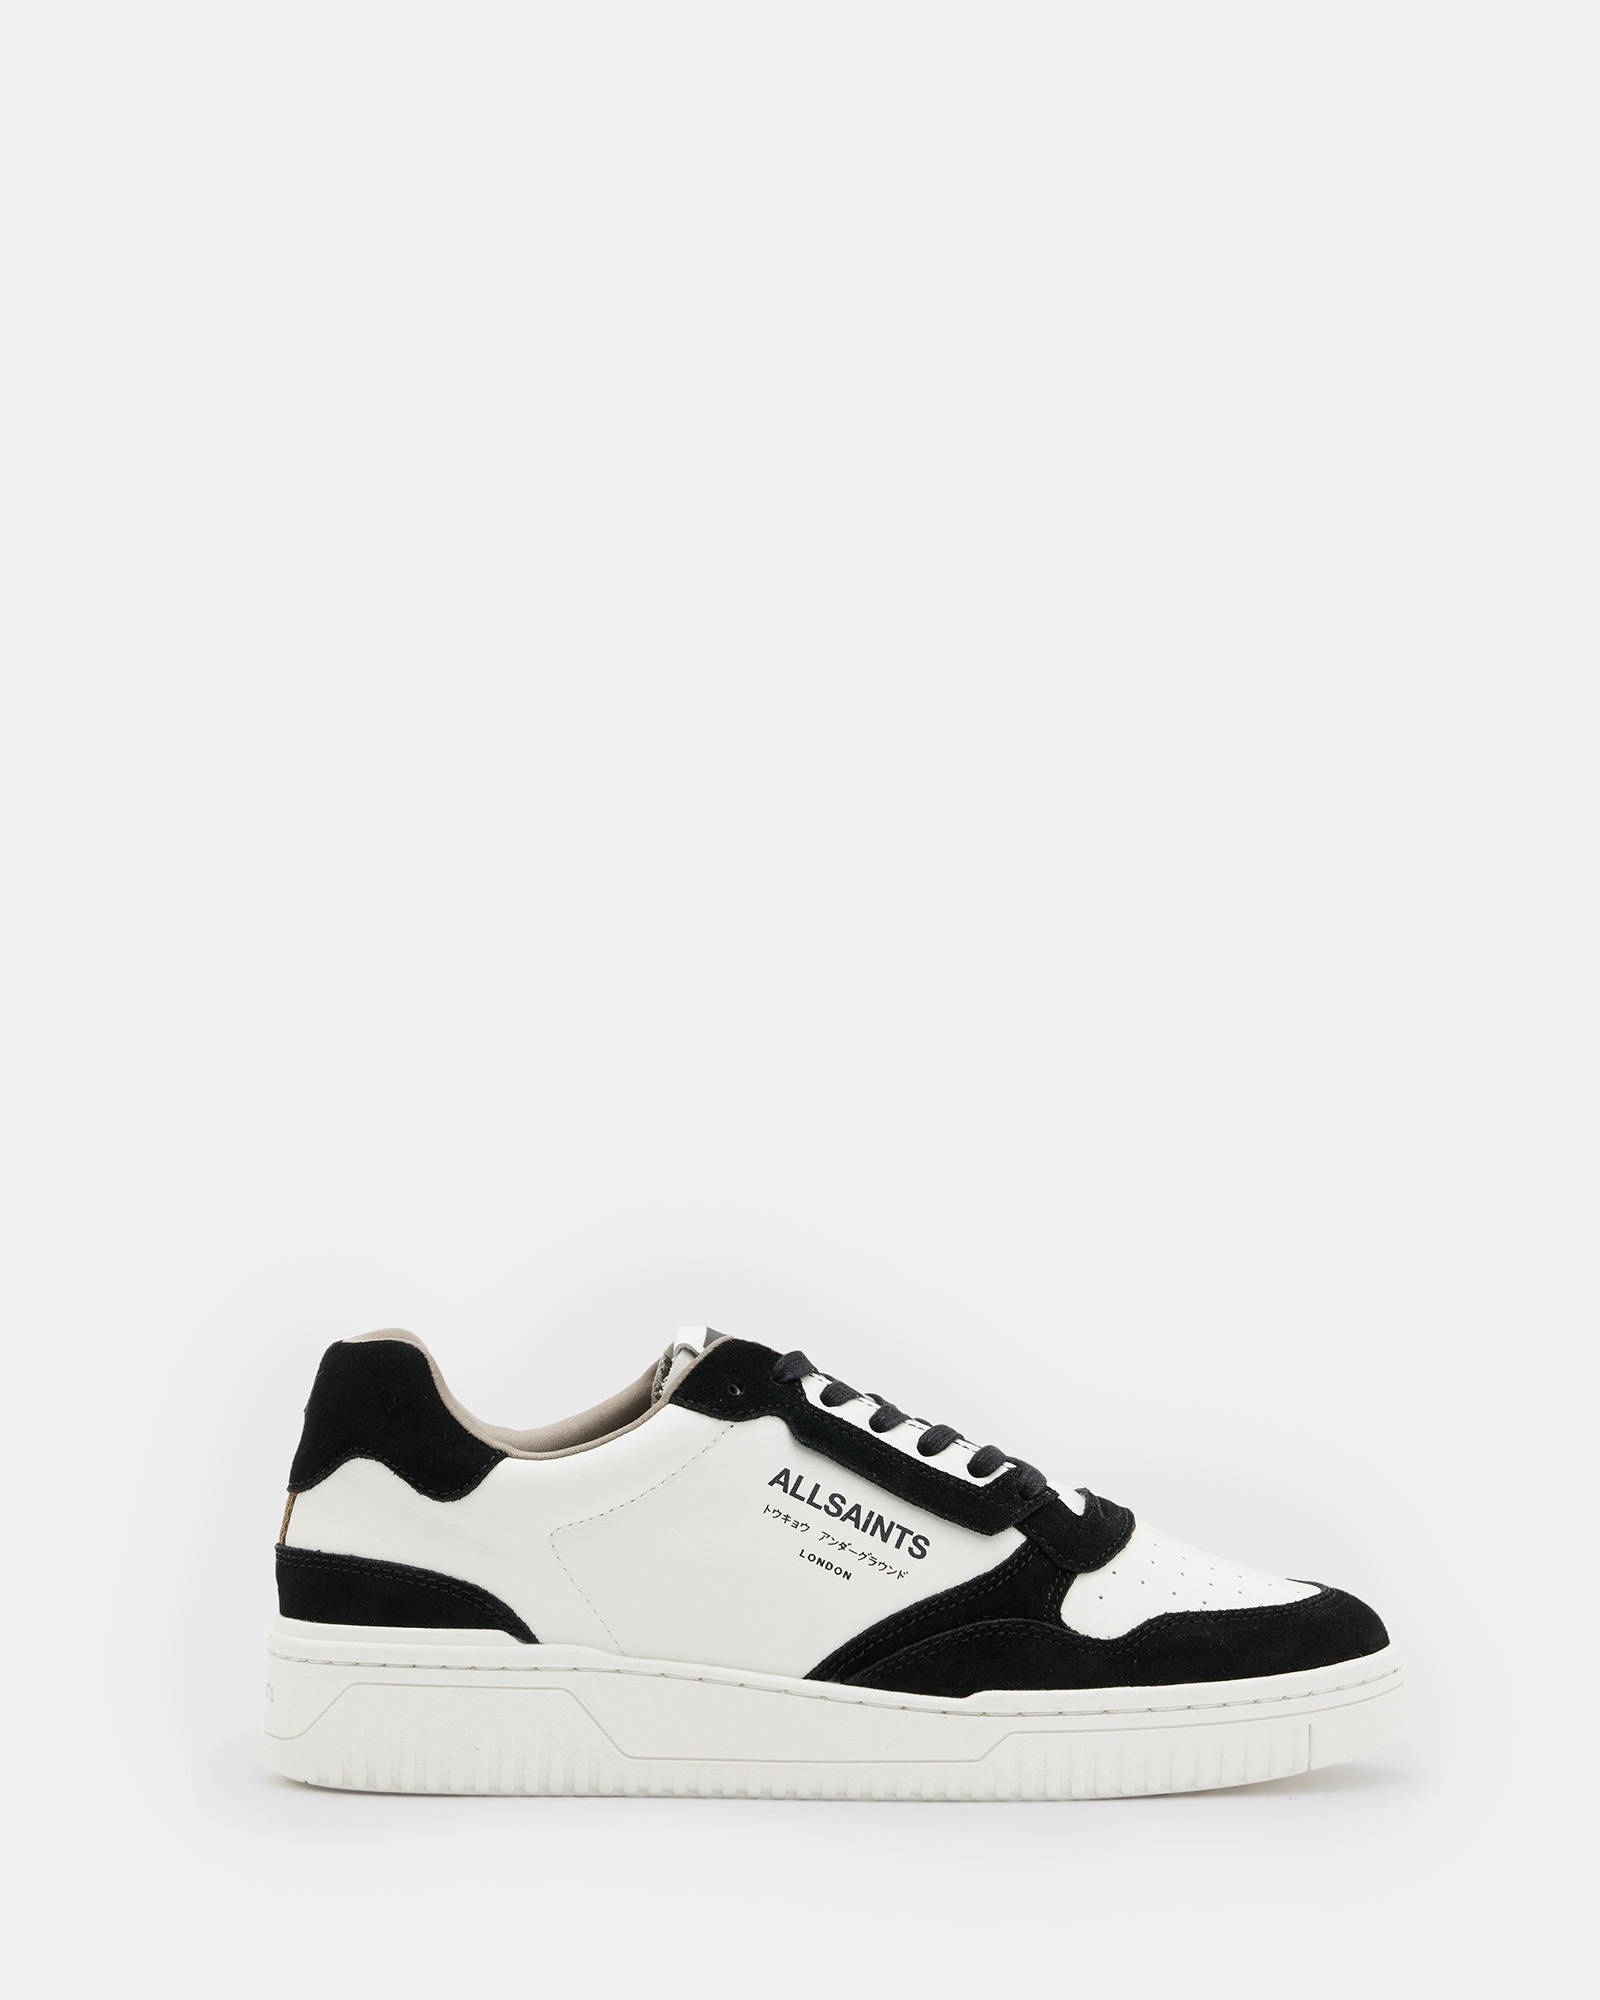 Allsaints Regan Leather Low Top Trainers In White/black